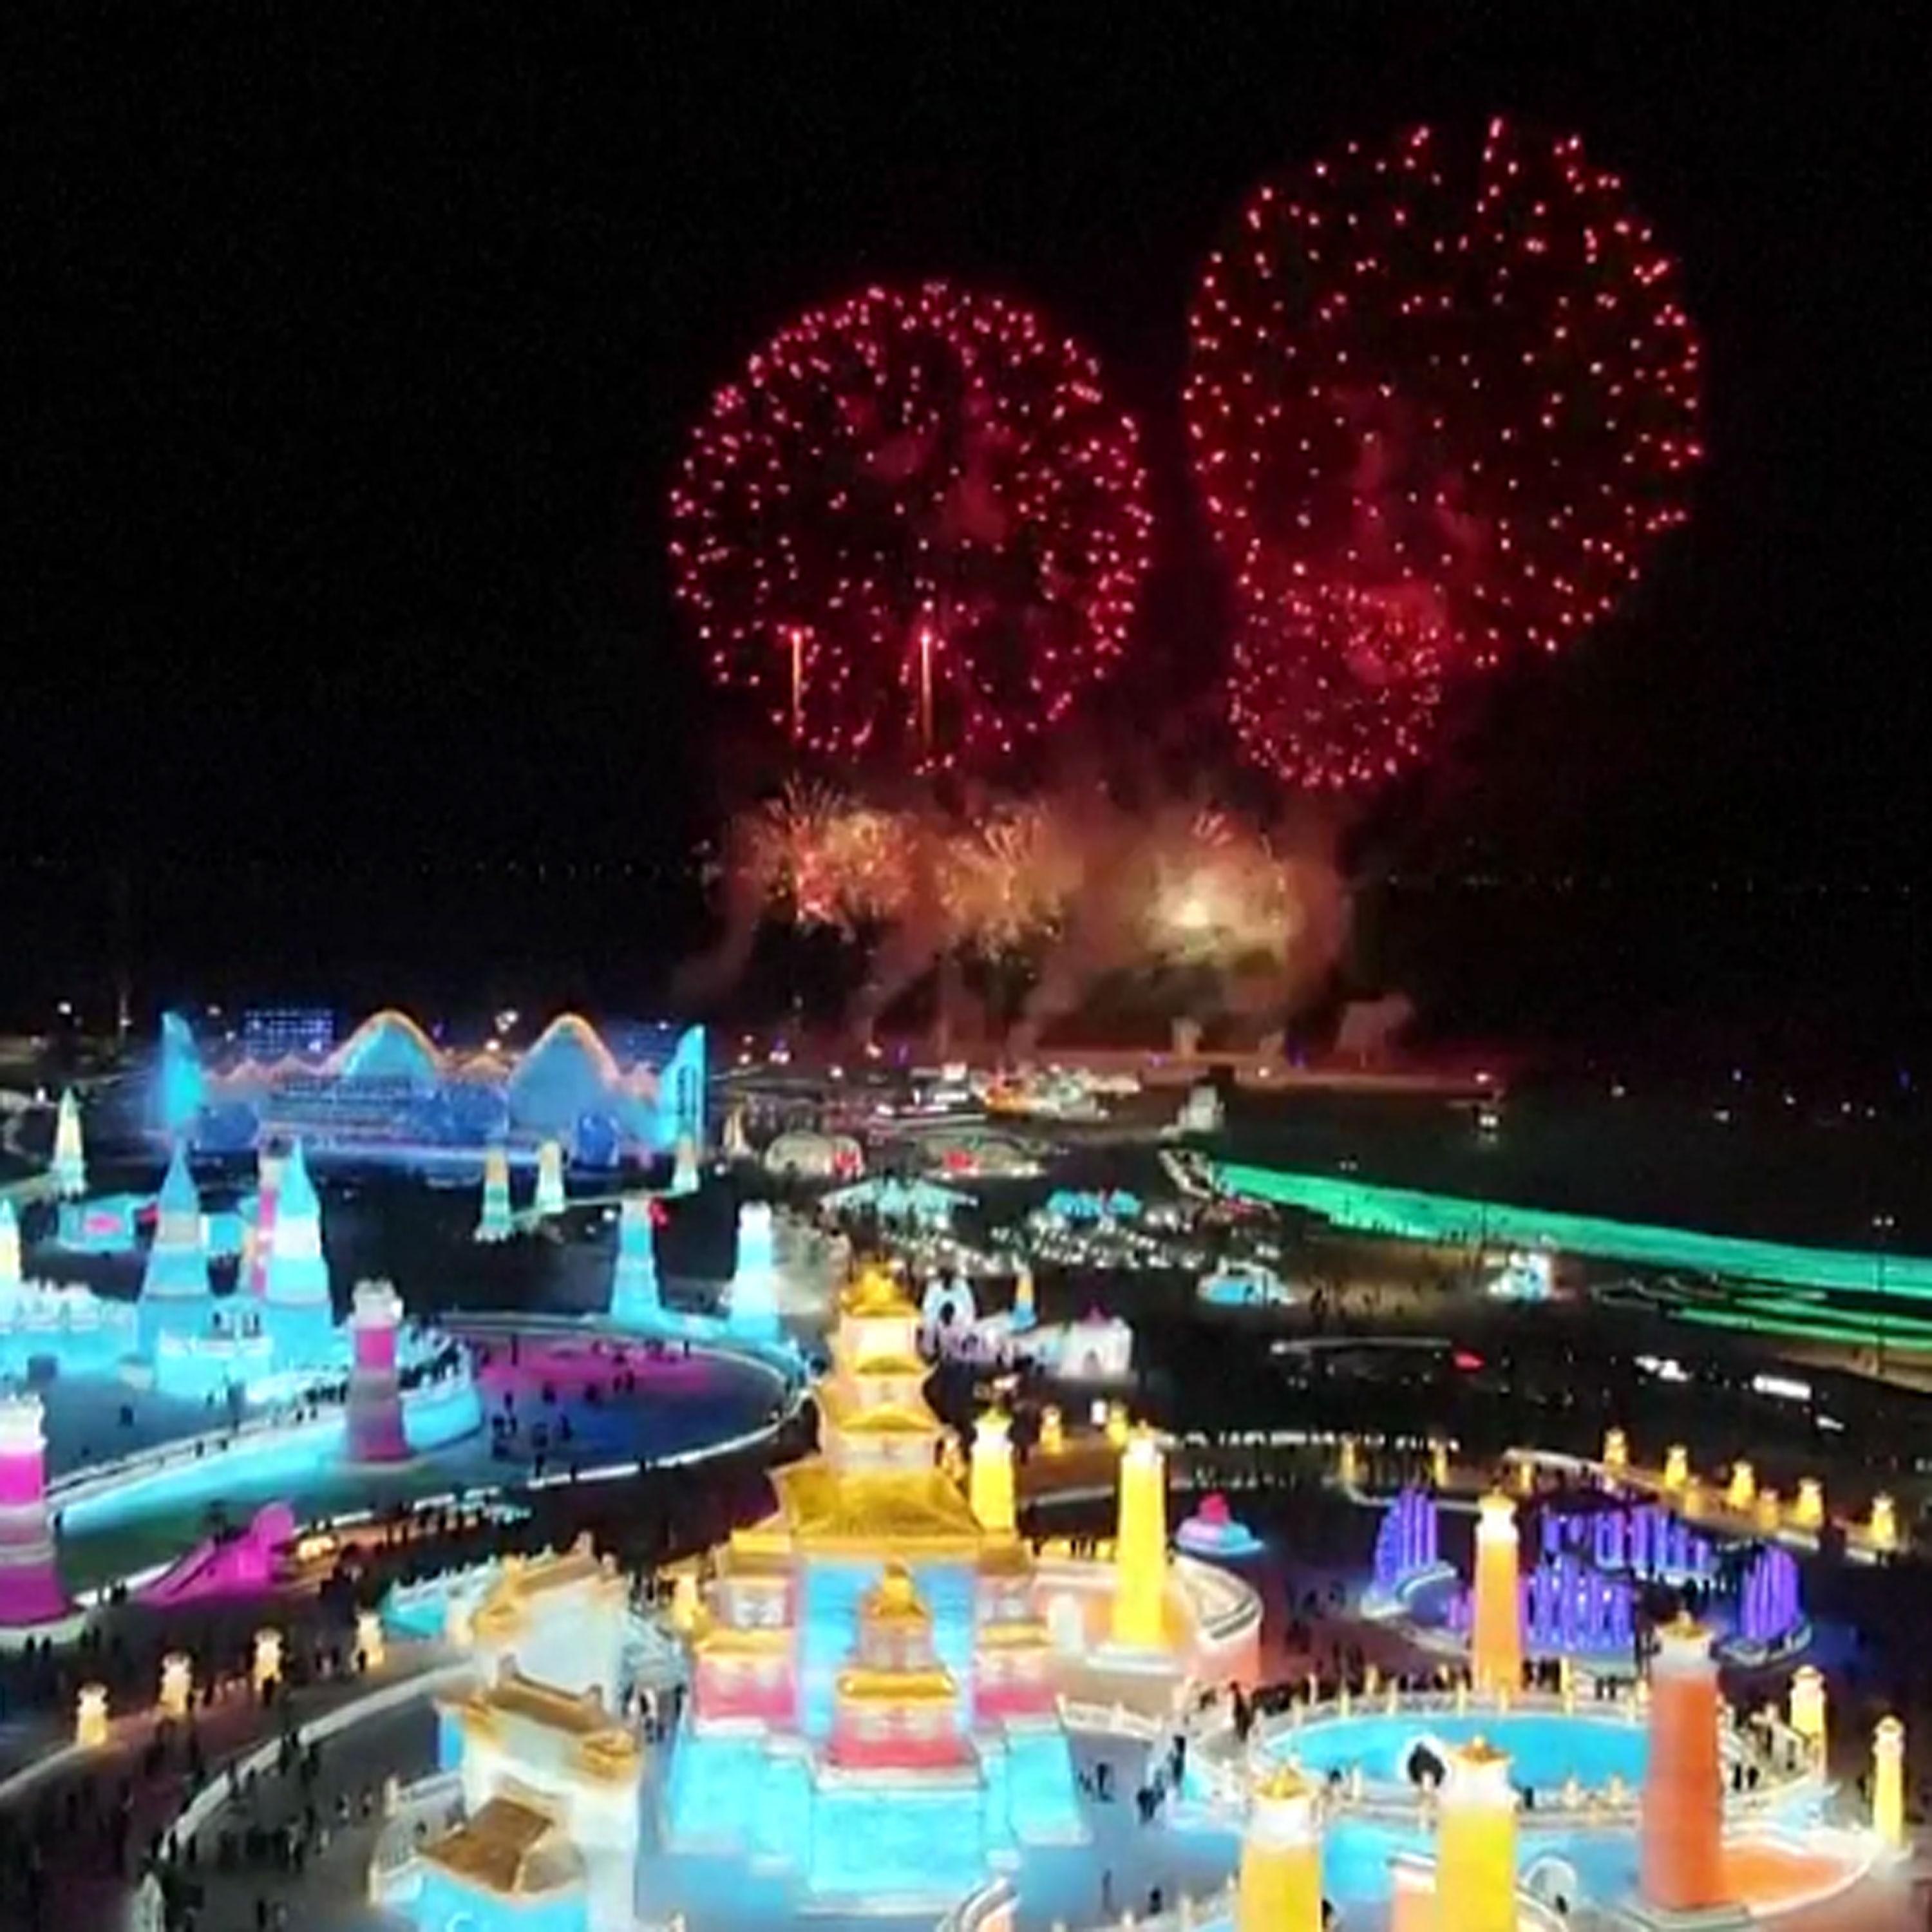 Harbin Ice and Snow Festival begins